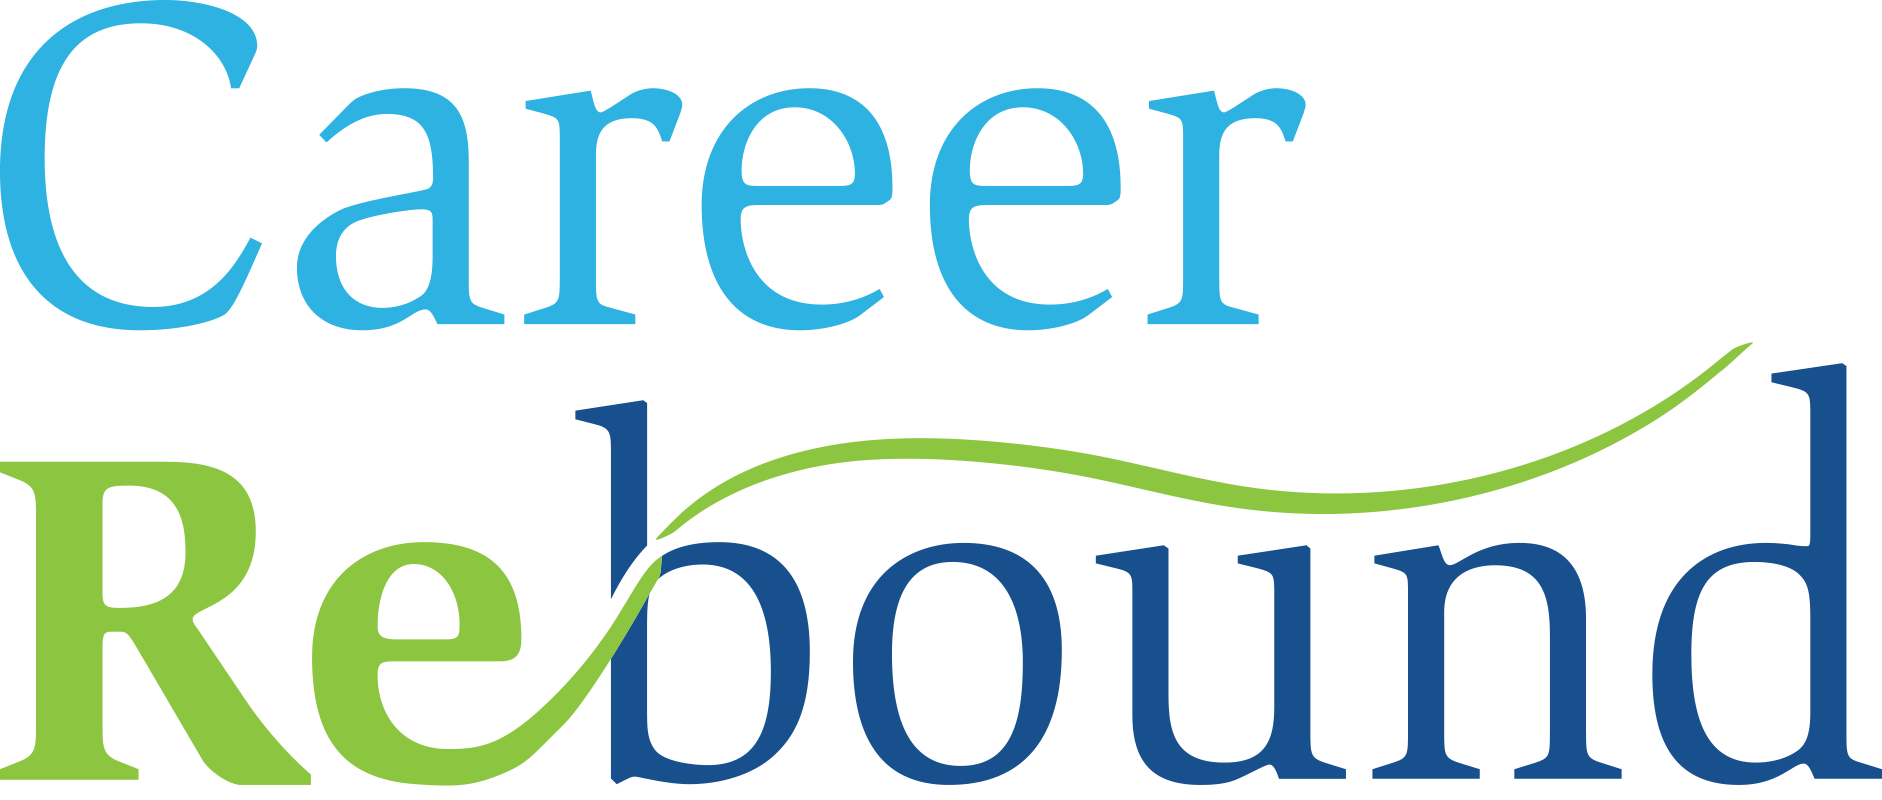 CAREER REBOUND - Networking - Training - Support